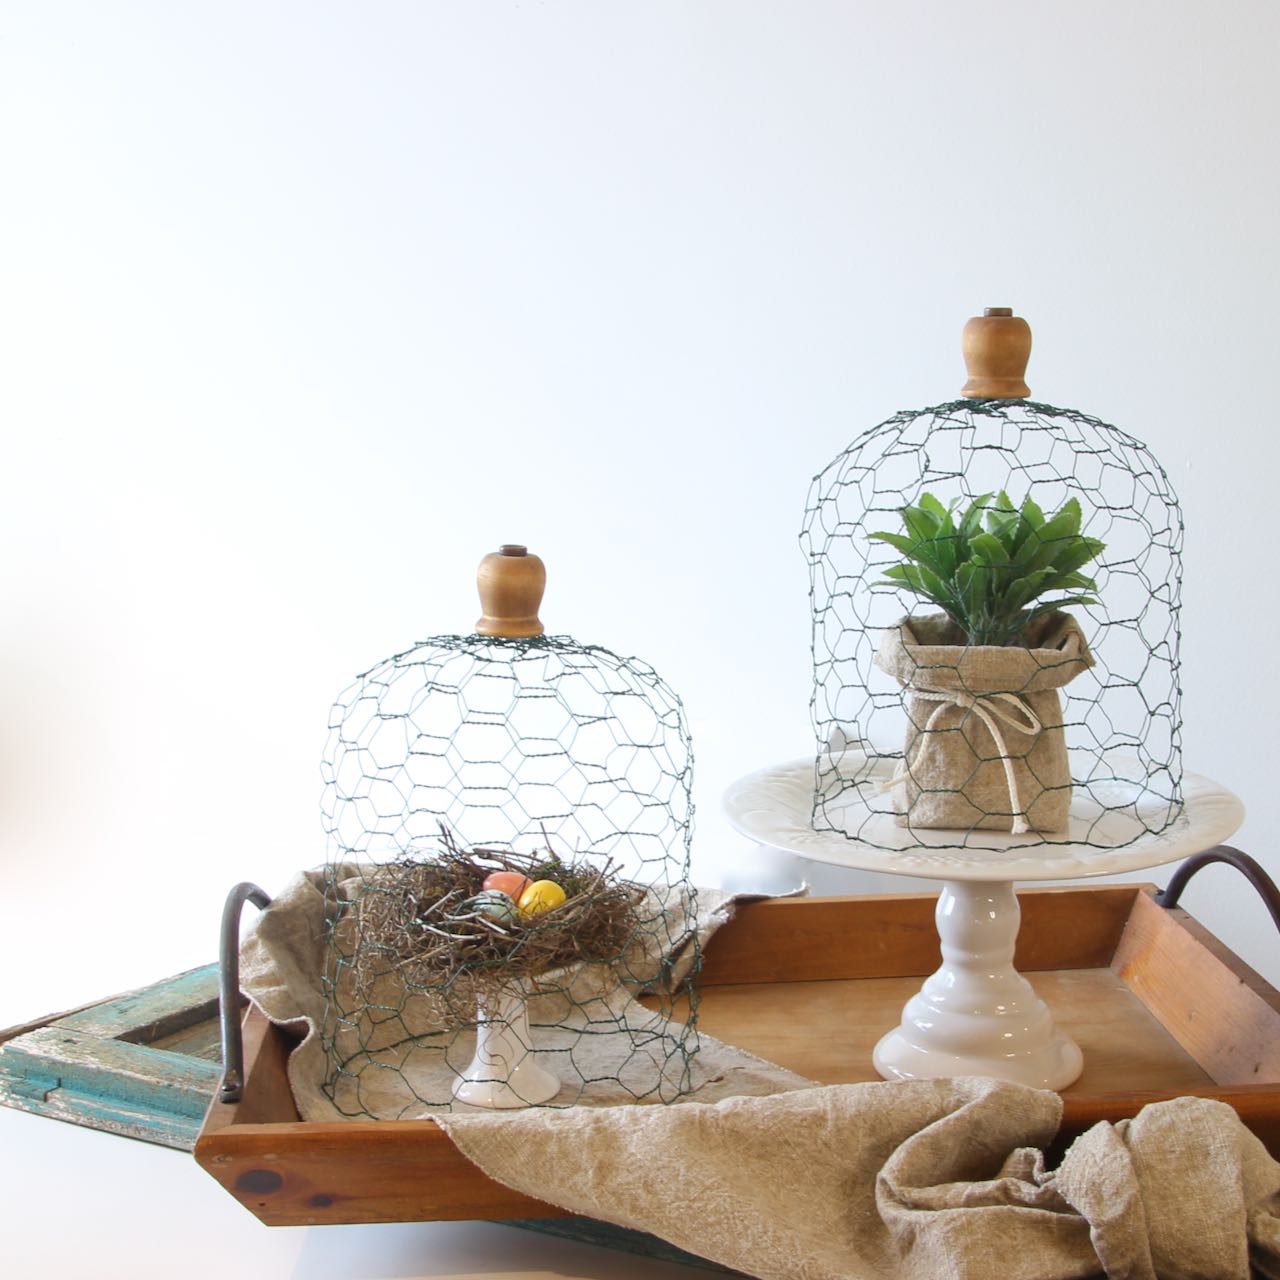 Two wire cloches on a wooden tray with a washed linen runner, one has a nest with three colored eggs in it and the other a small sage plant